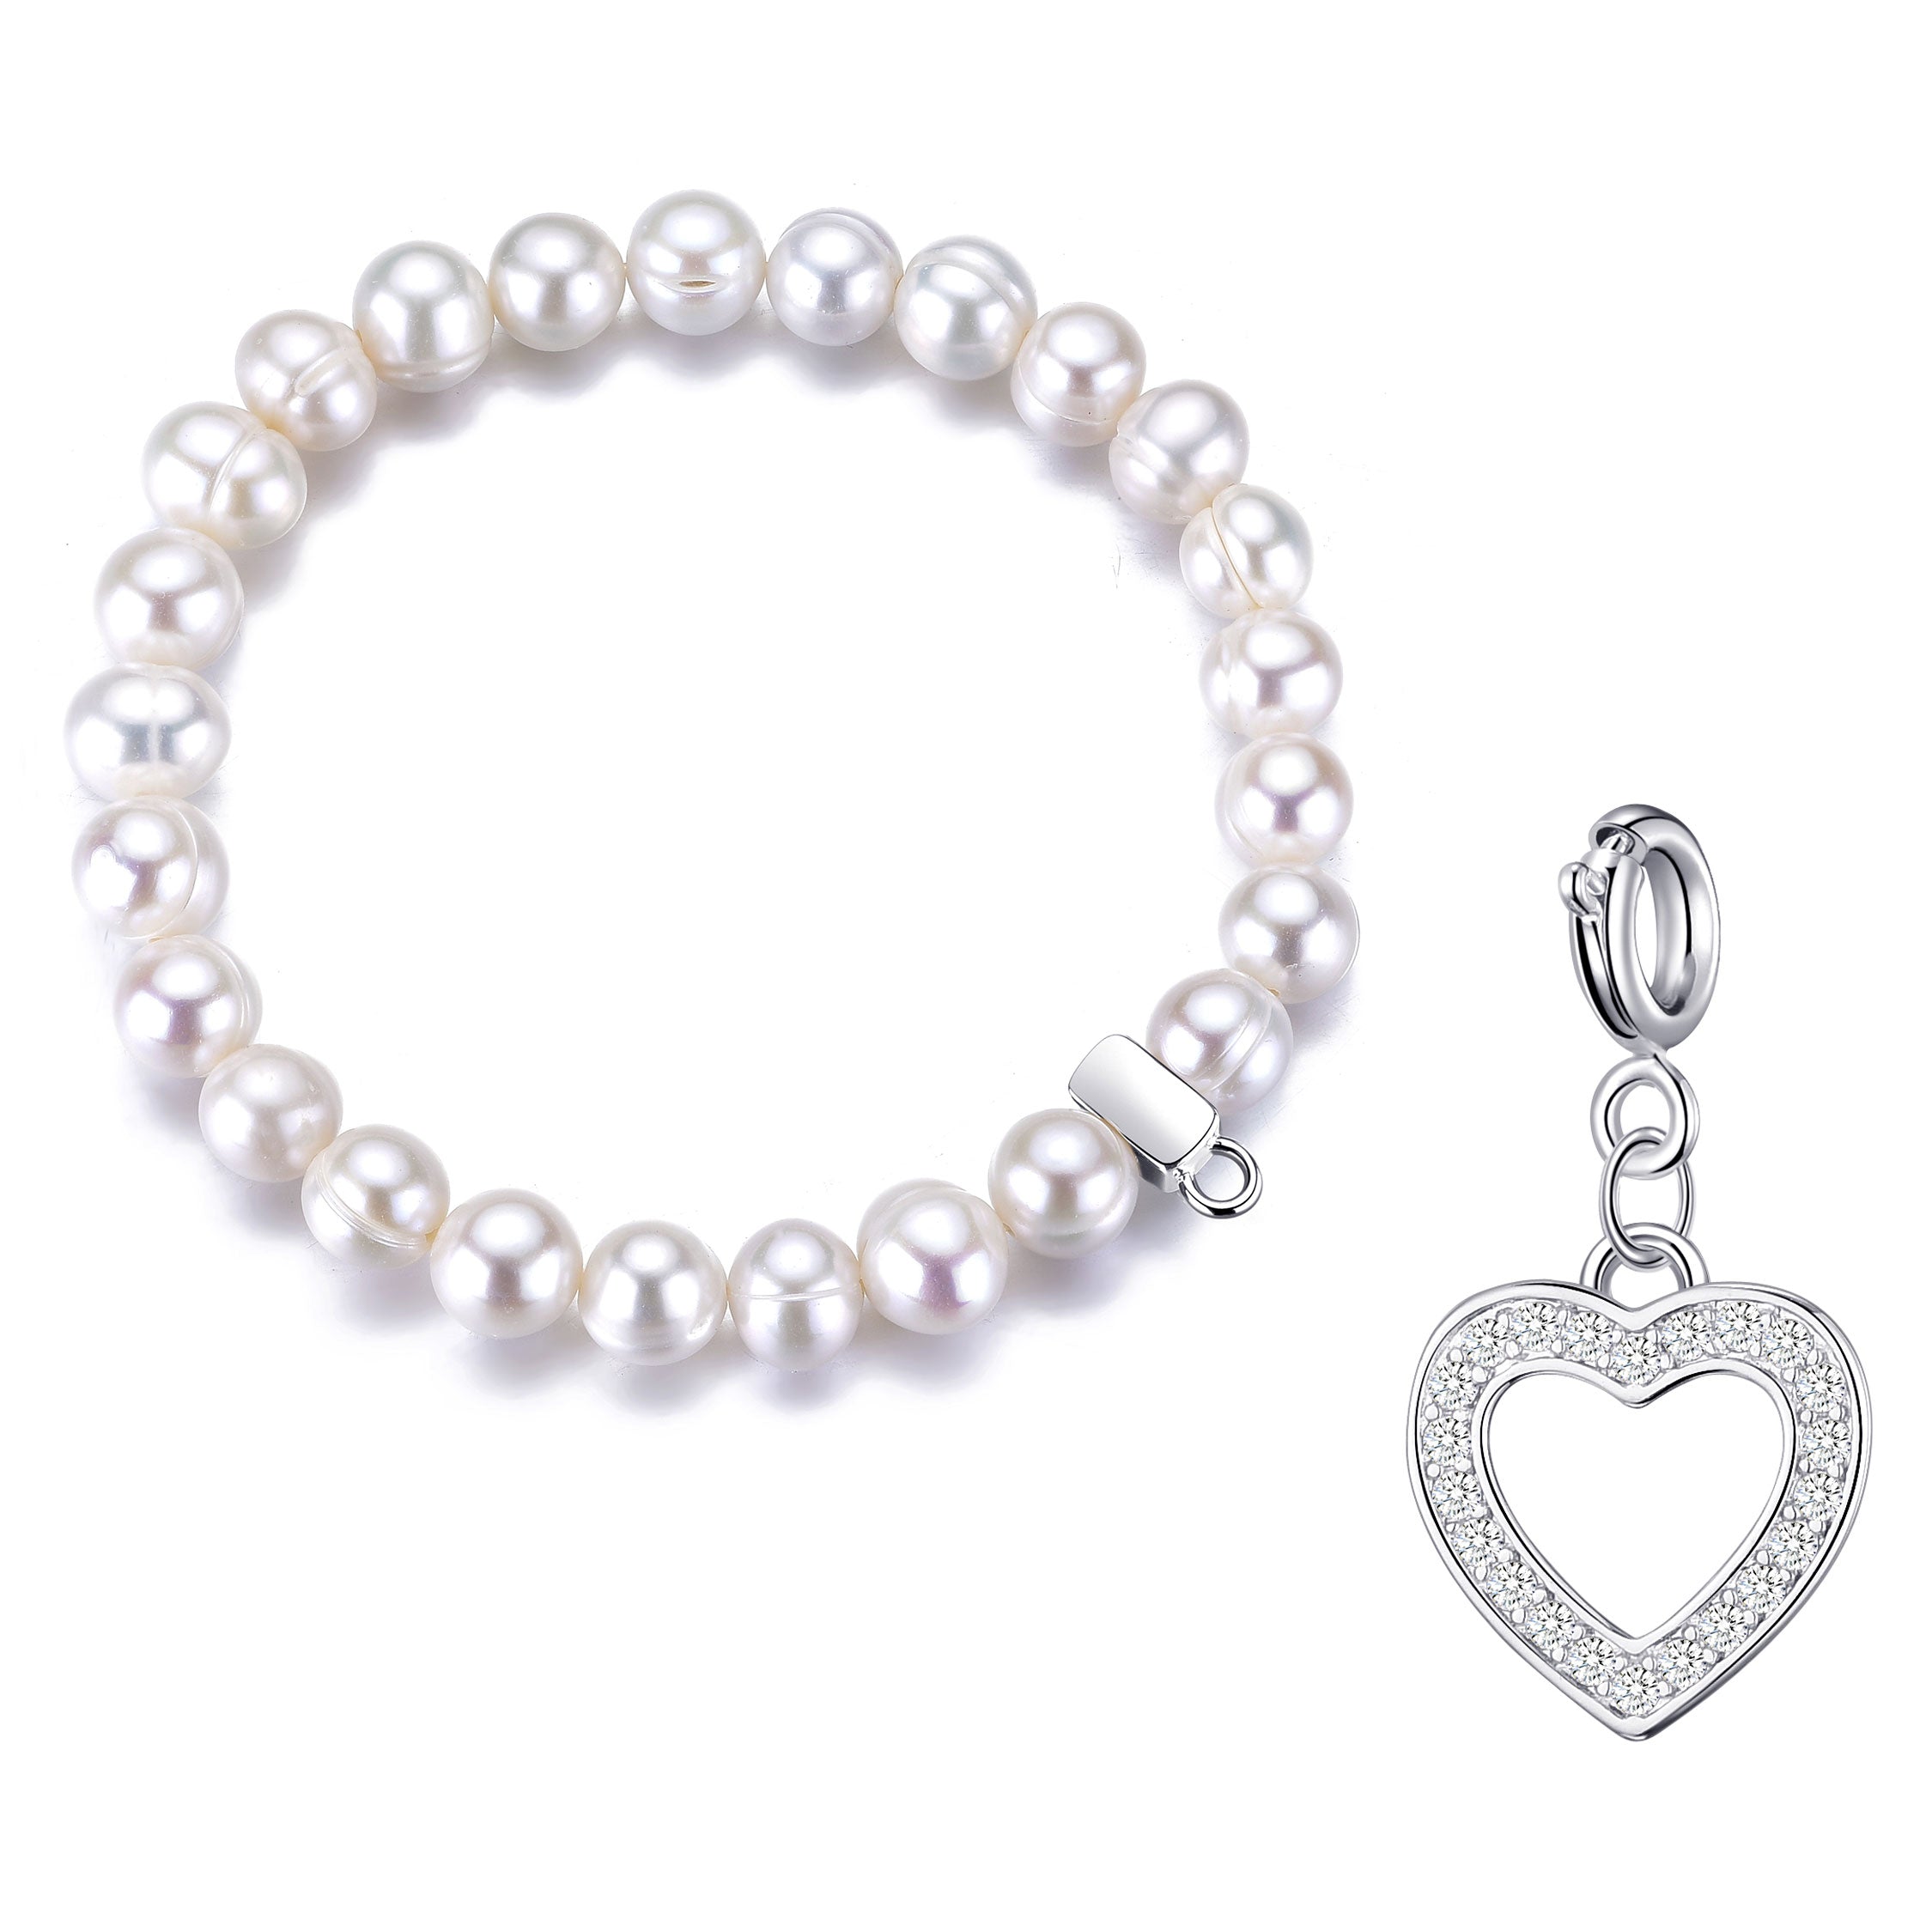 Freshwater Baroque Pearl Stretch Bracelet with Charm Created with Zircondia® Crystals